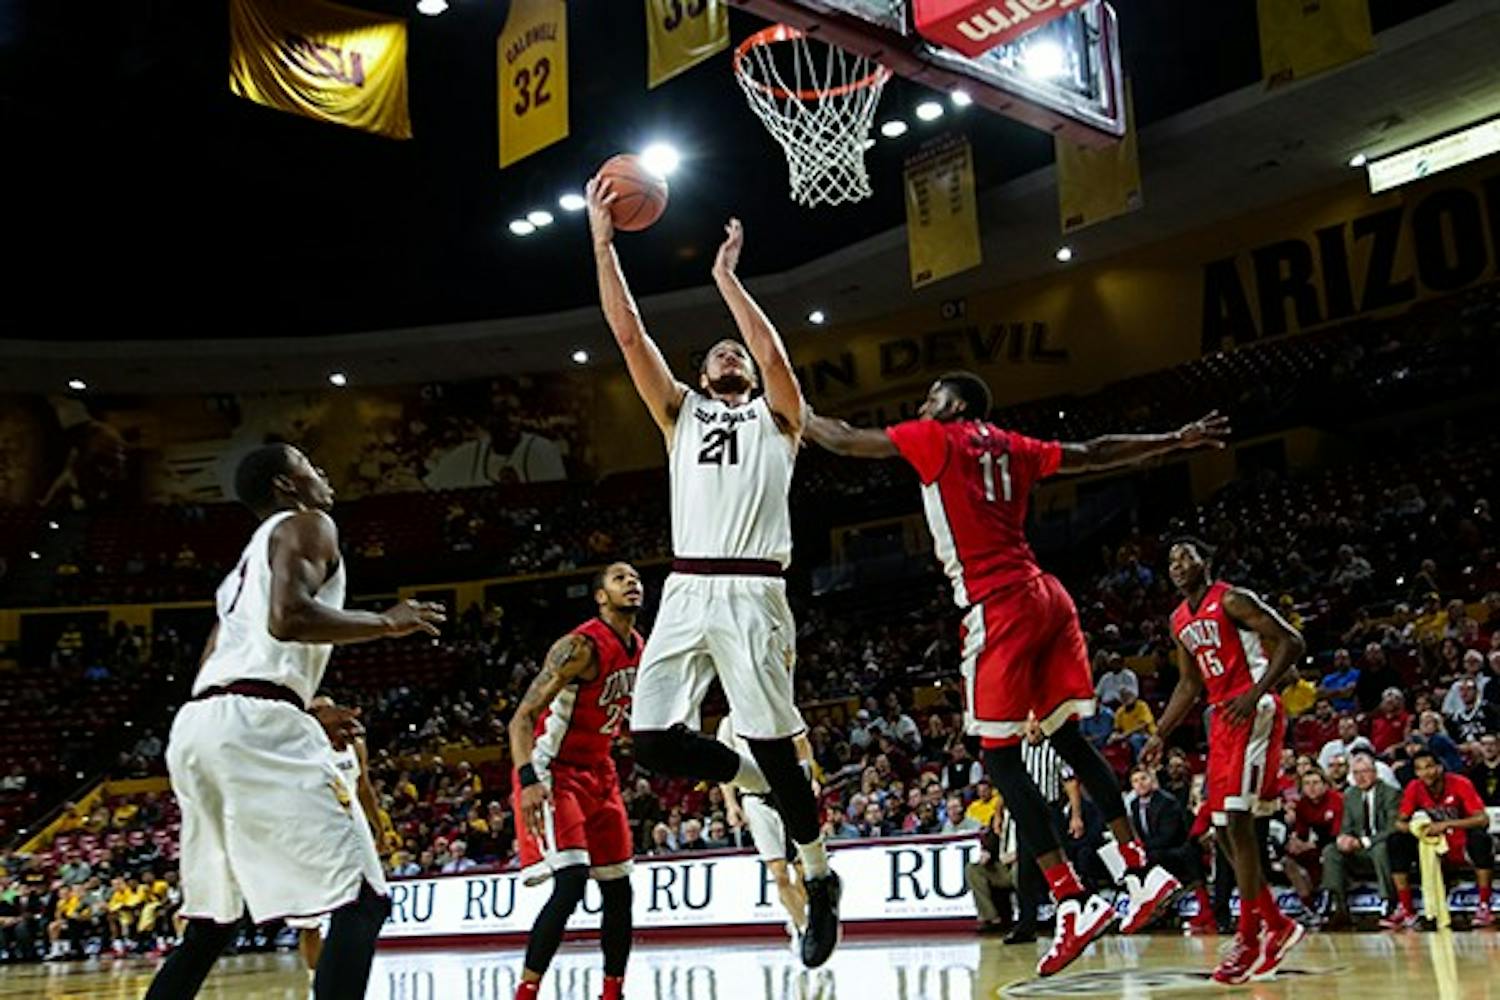 ASU junior forward Eric Jacobsen scores a layup early in the first half during the ASU vs UNLV game on Dec. 3rd, 2014 at the Wells Fargo Arena. Jacobsen would command the post scoring 16 points to lead the Sun Devils to a 77-55 victory over the Runnin Rebels. (Photo by Daniel Kwon)